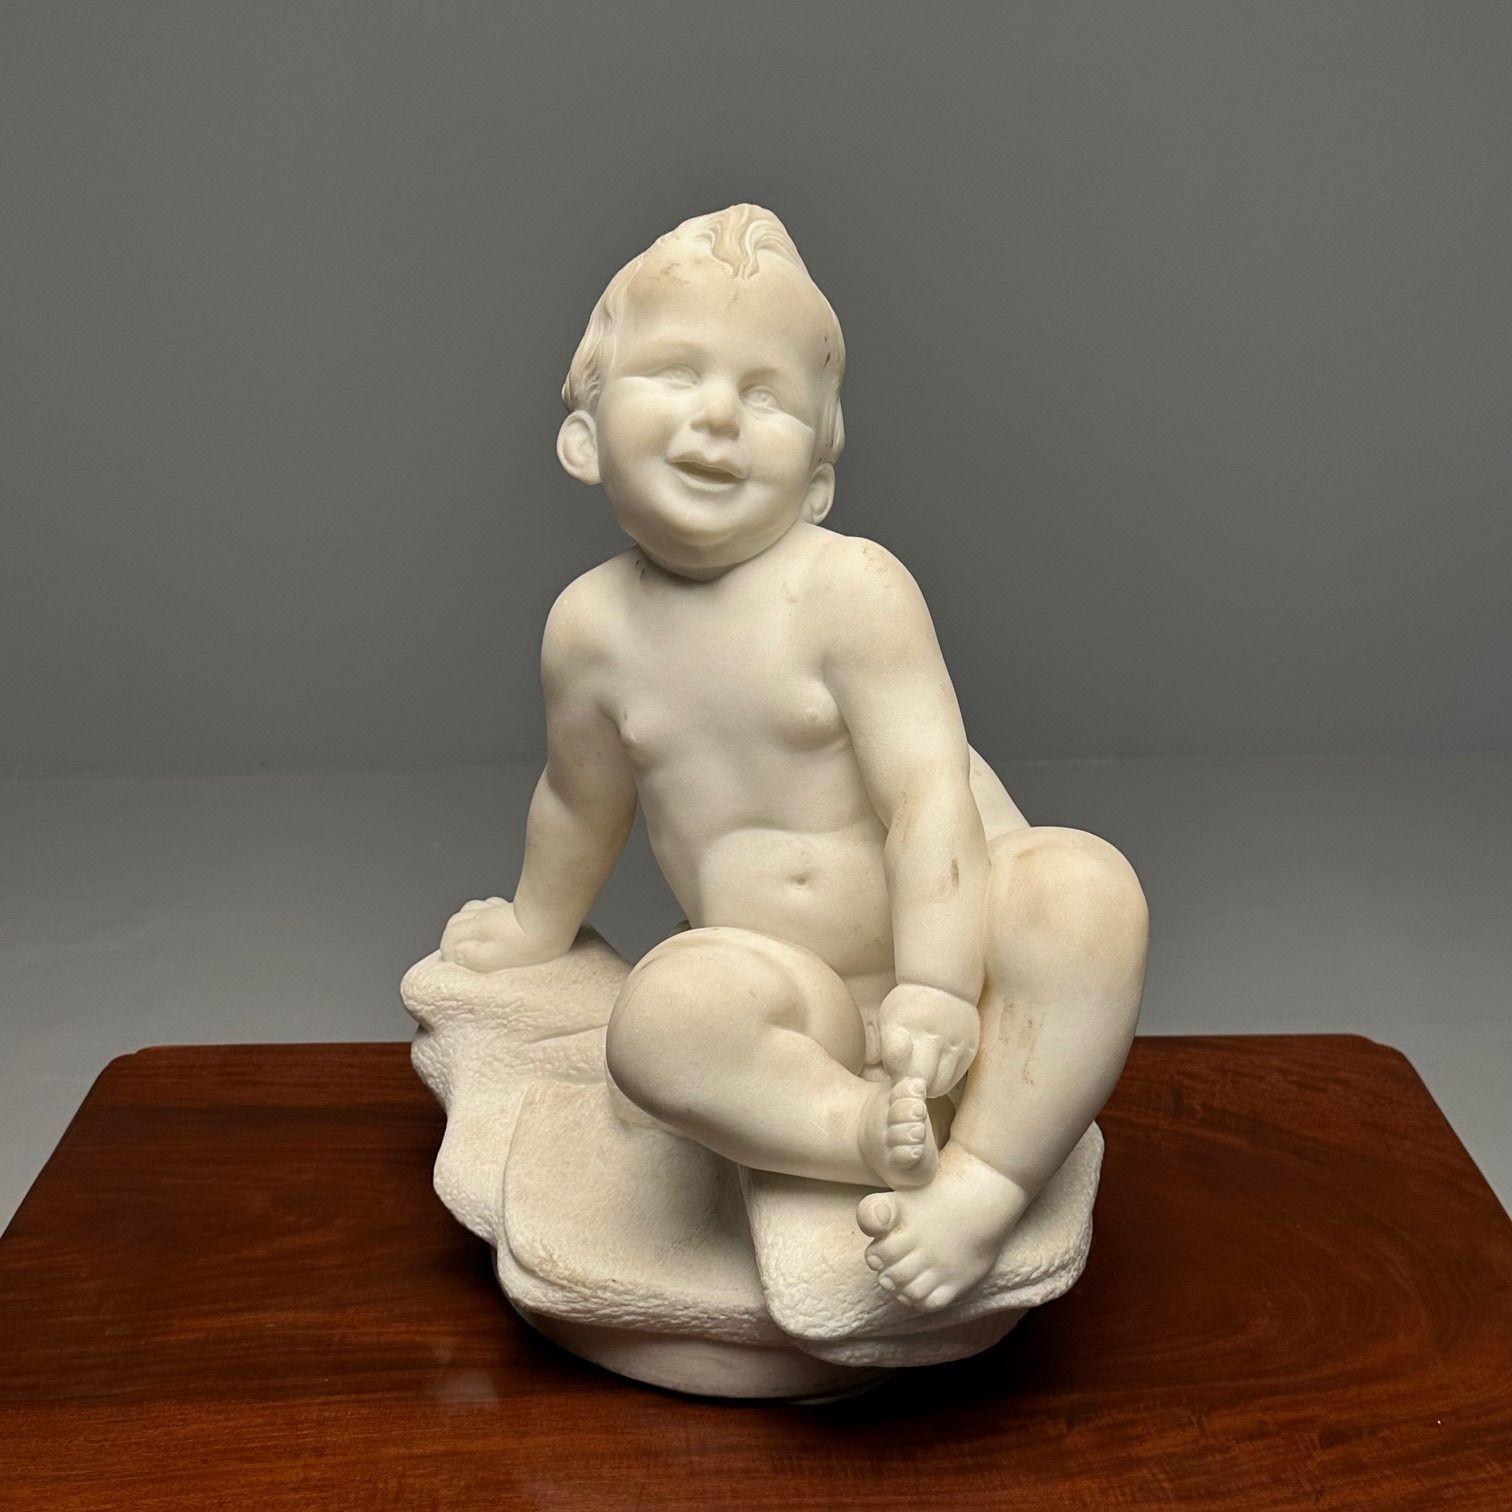 Carved Marble Figure of Seated Nude Child, 19th/Early 20th Century, Statue

A lovely finely detailed figure of a male child seated upon a base playing with his toes. This statue has genitalia tastefully exposed.

Height 19 1/2 inches.

SZA